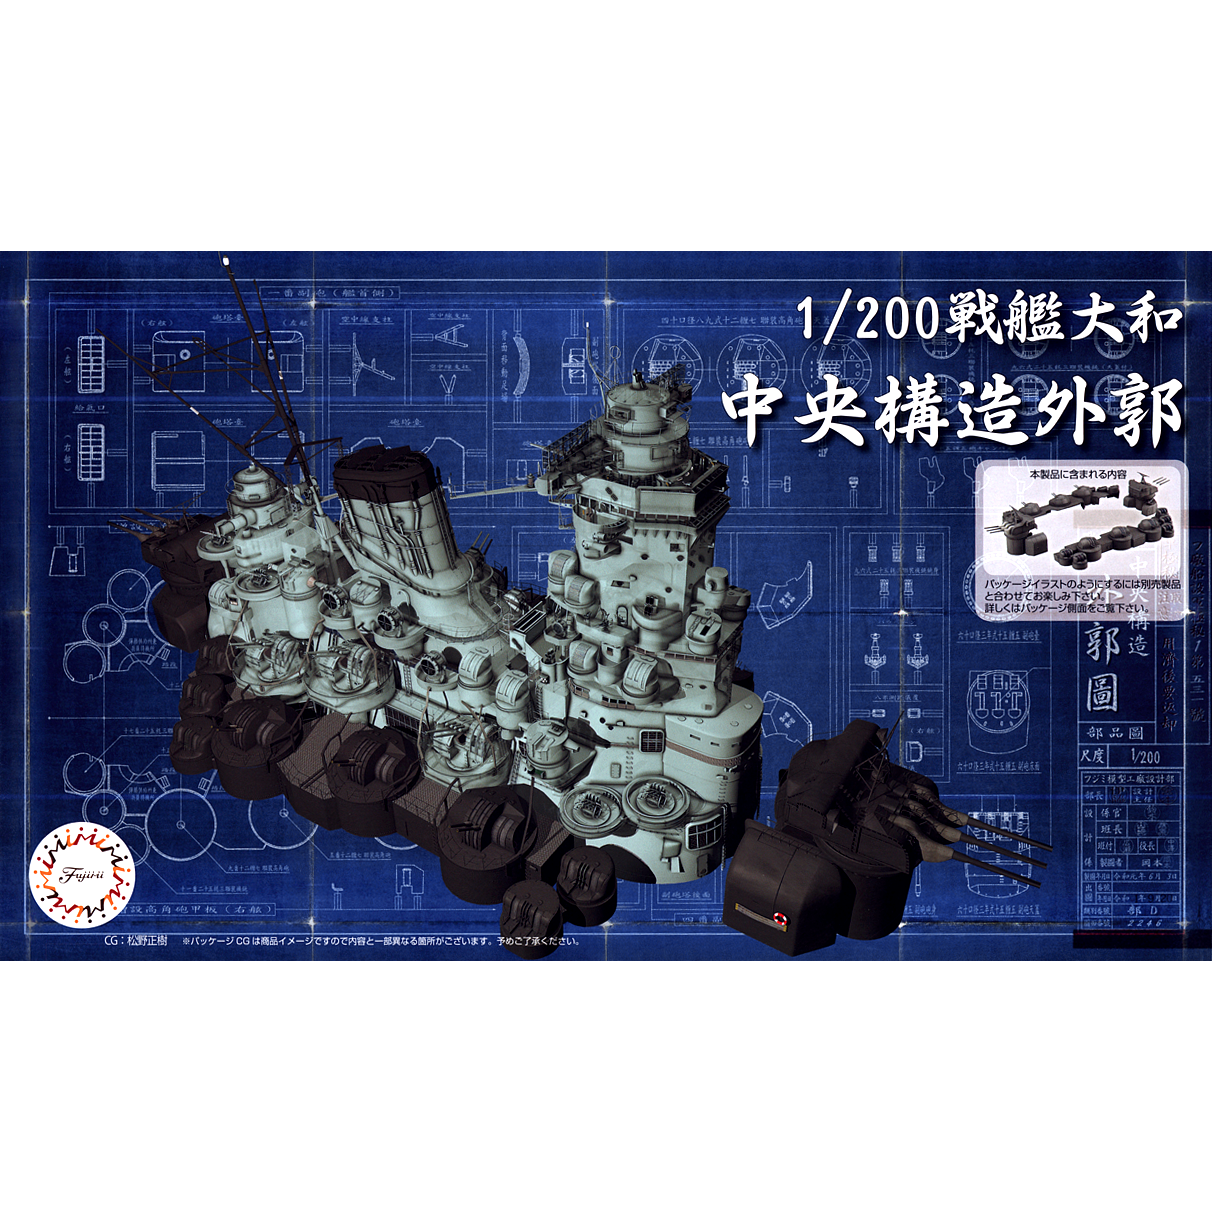 Battleship Yamato Central Structure Outlying Facilities 1/200 Model Ship Kit #2041 by Fujimi